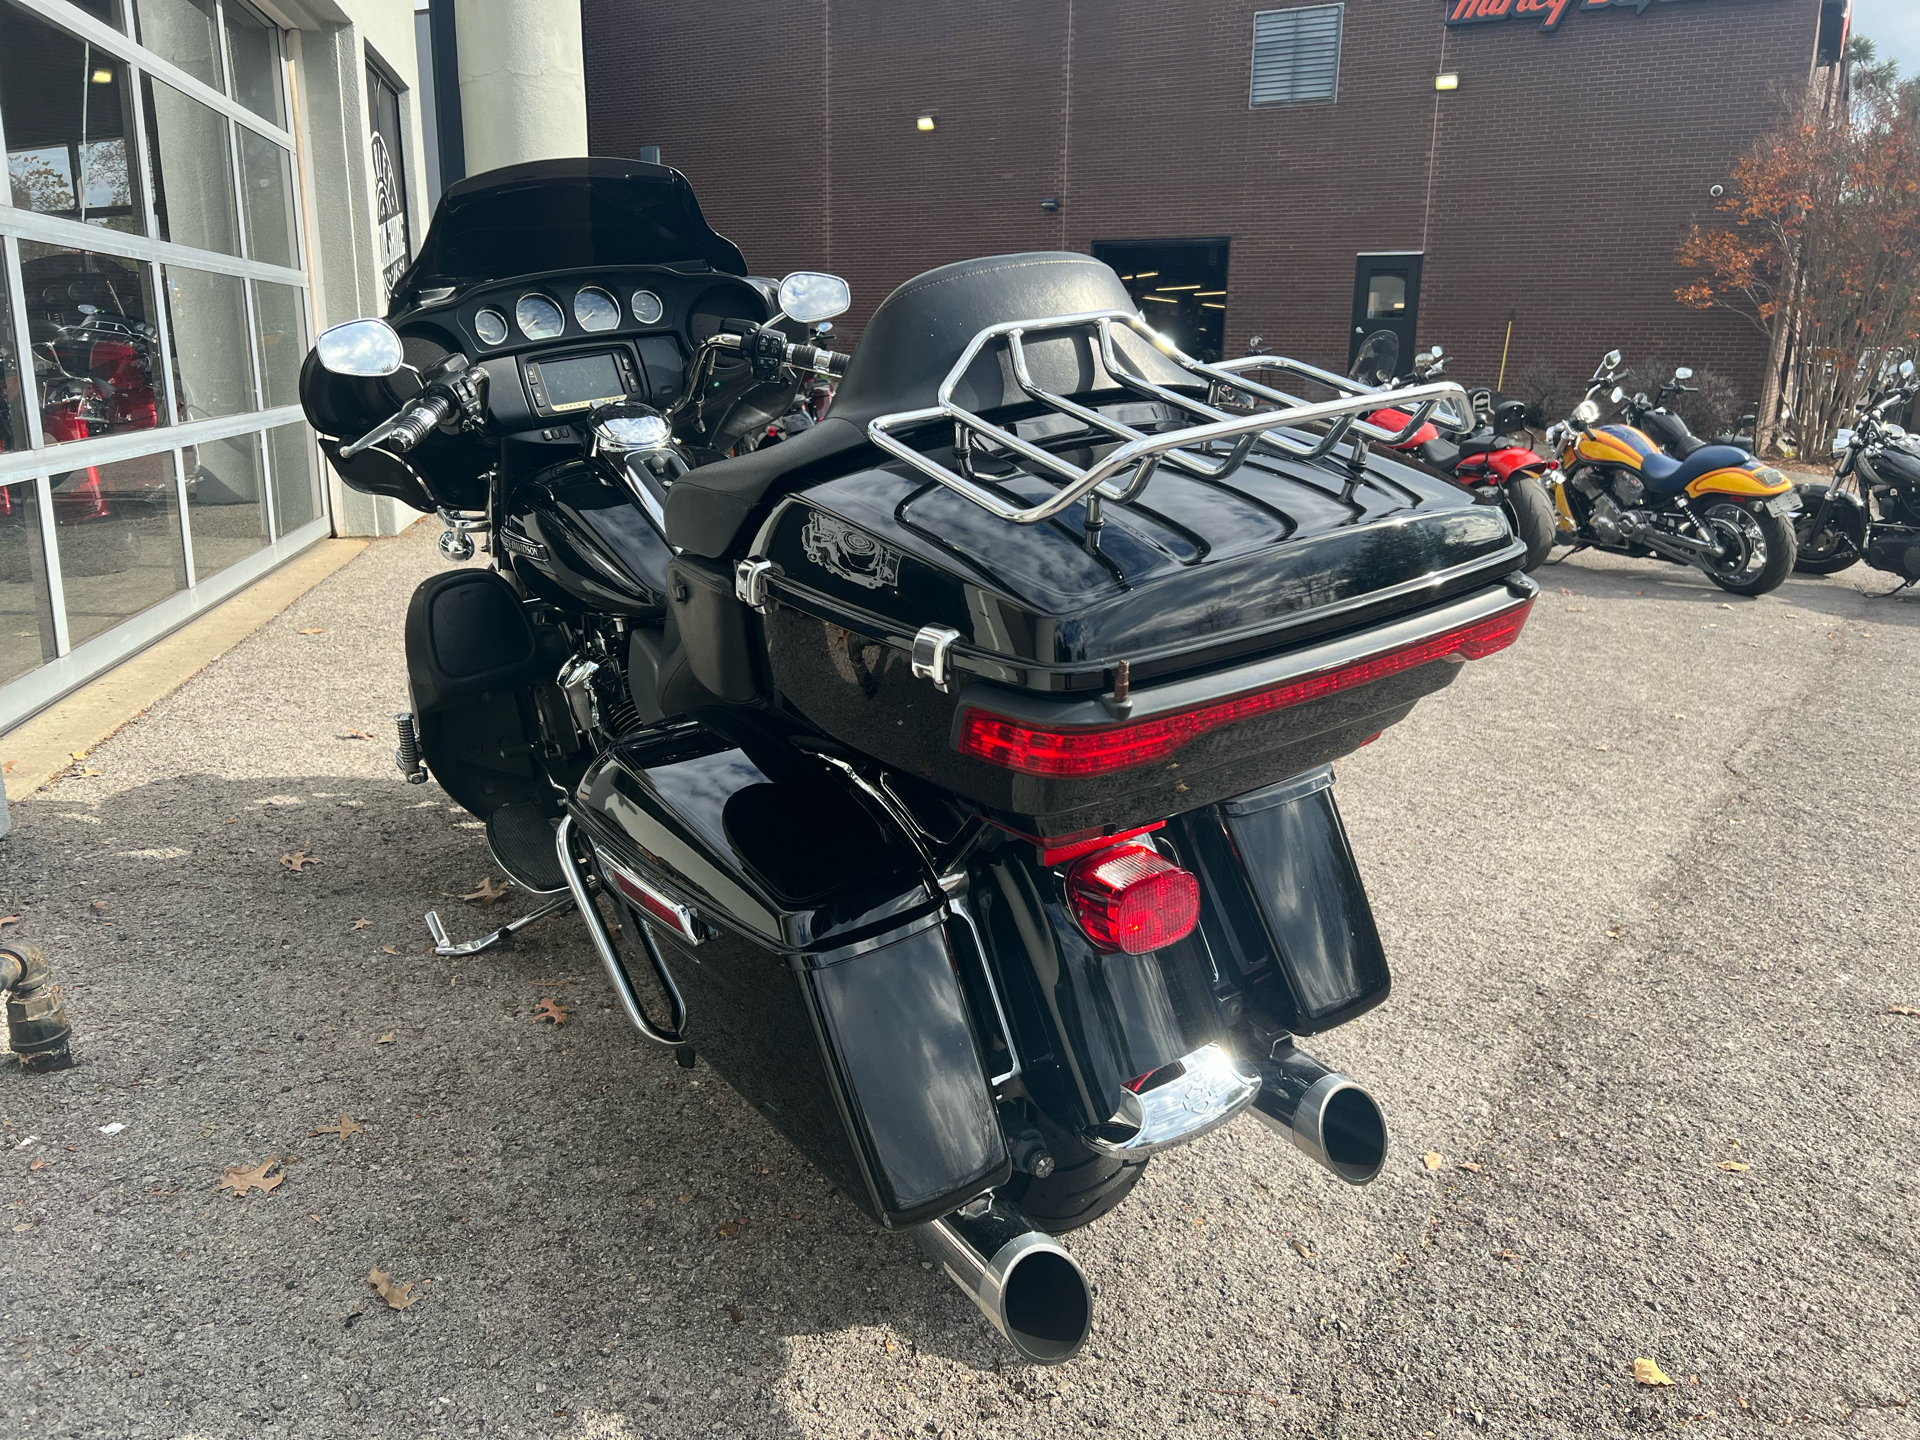 2018 Harley-Davidson Electra Glide® Ultra Classic® in Franklin, Tennessee - Photo 14